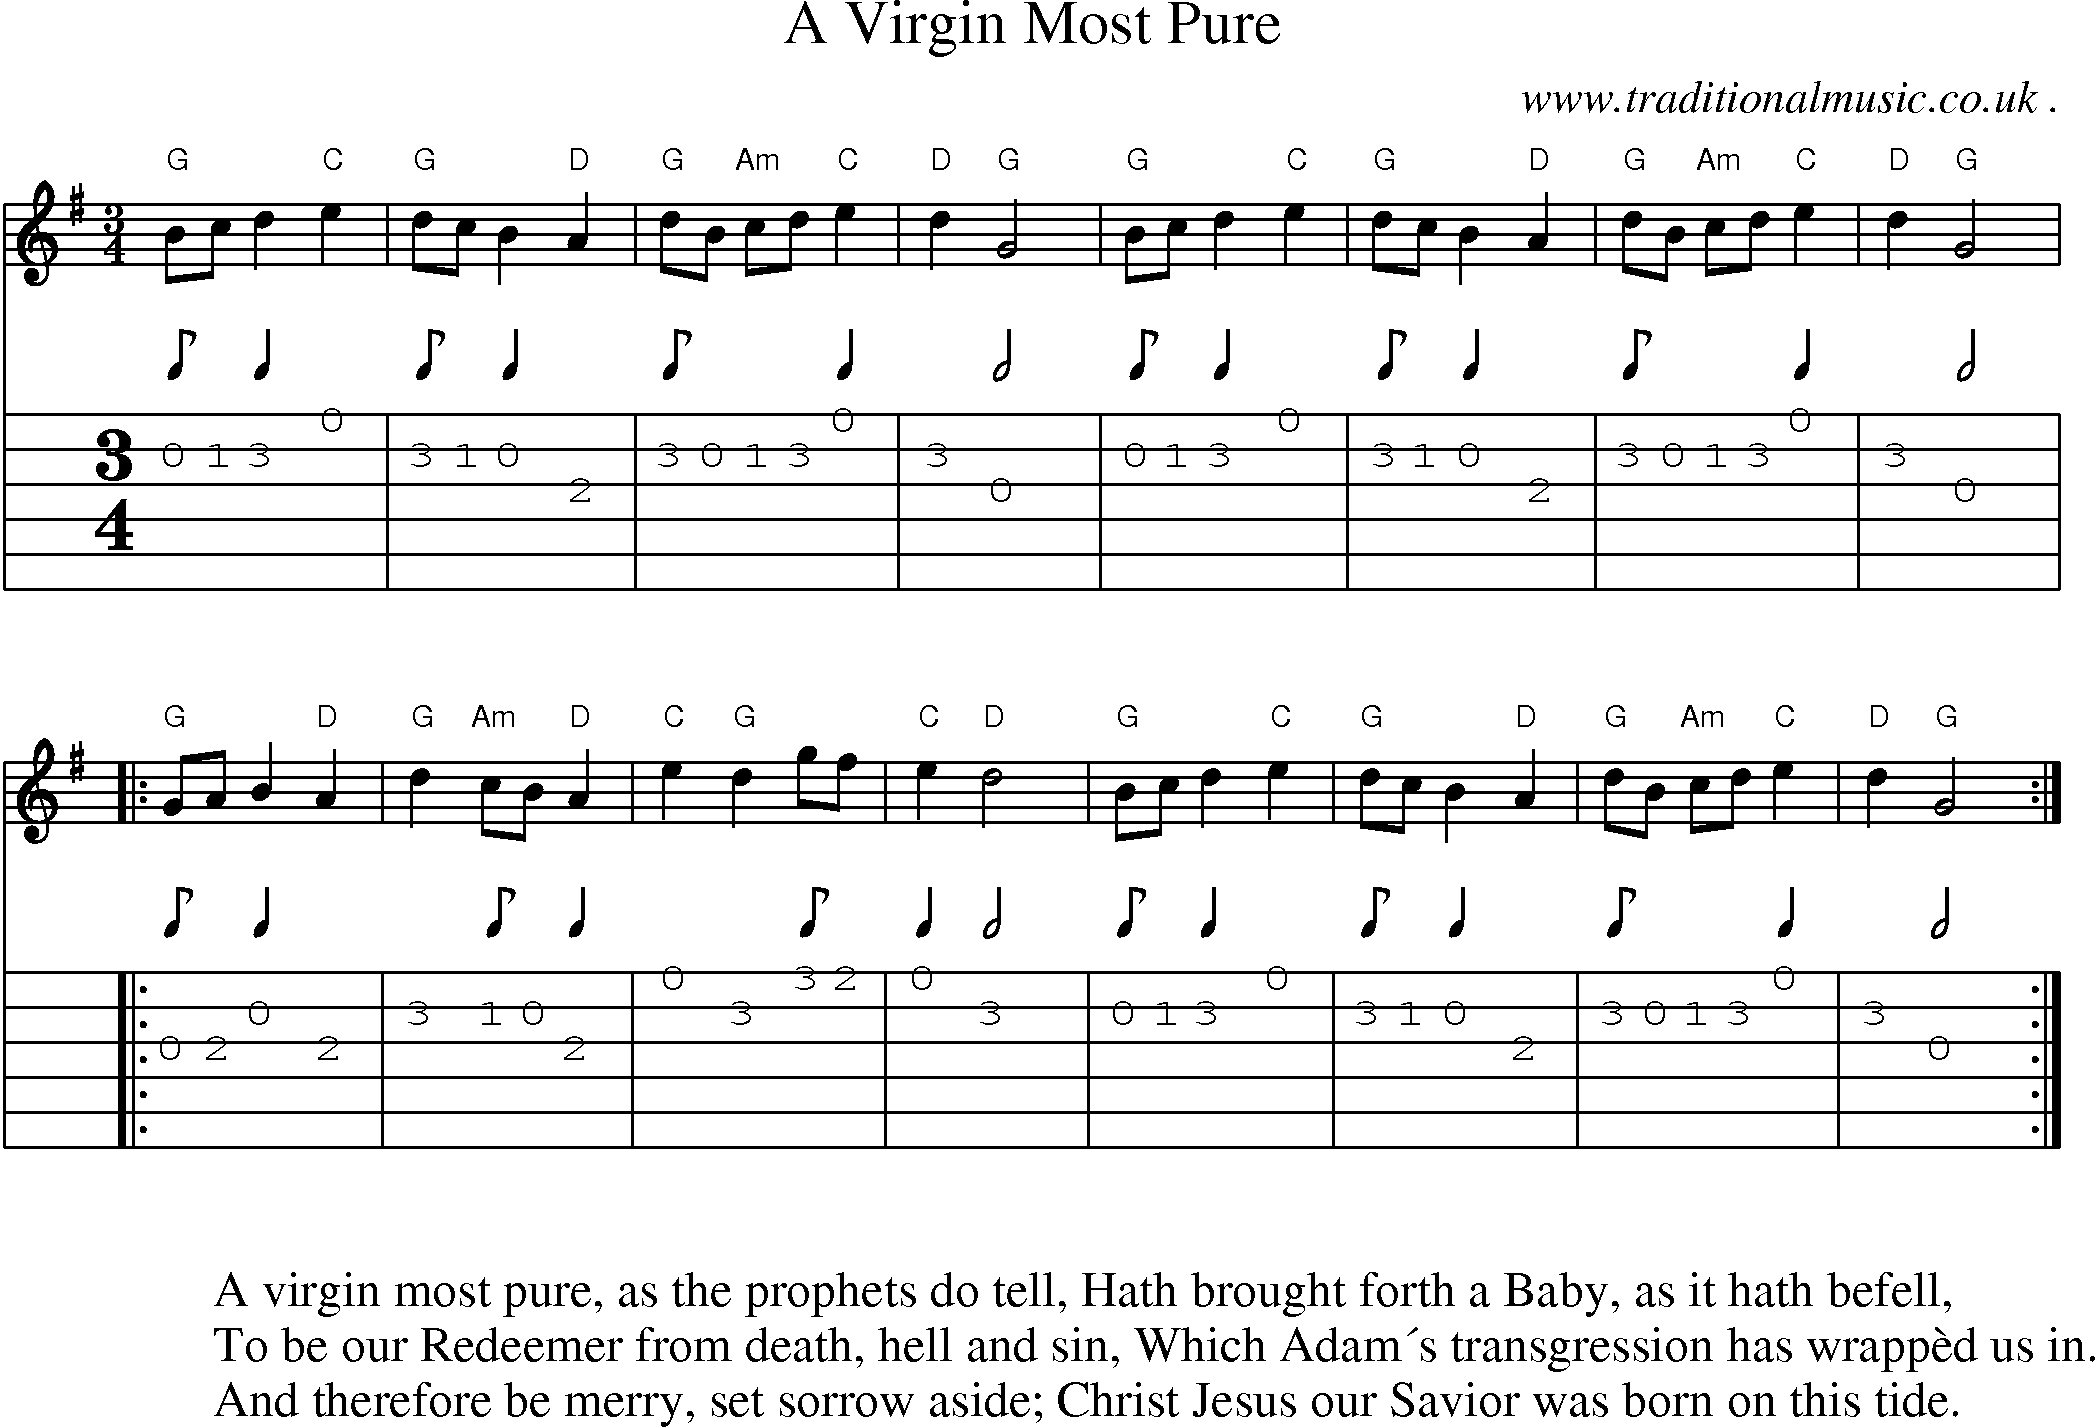 Music Score and Guitar Tabs for A Virgin Most Pure